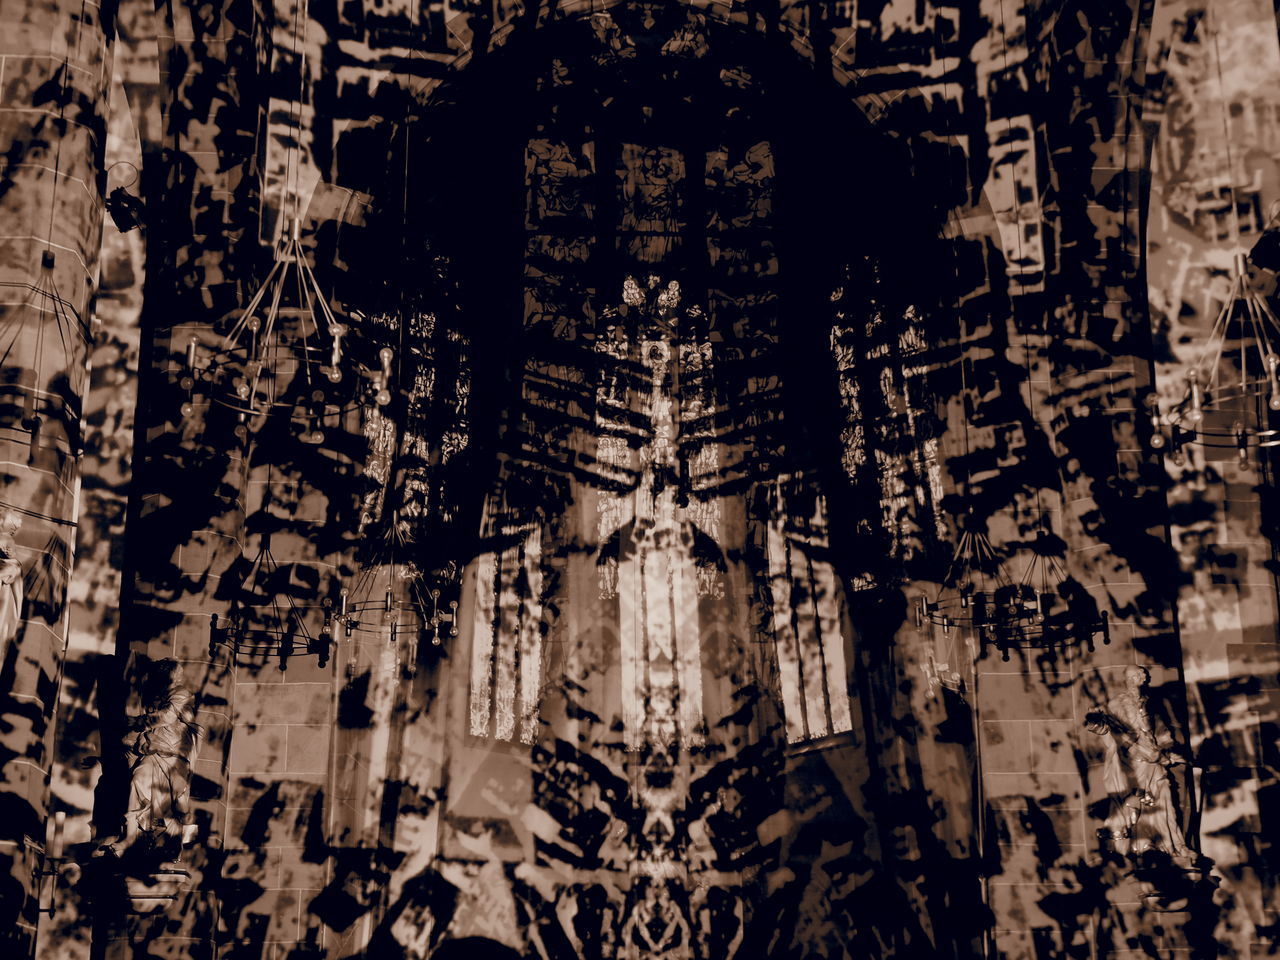 DIGITAL COMPOSITE IMAGE OF OLD CATHEDRAL